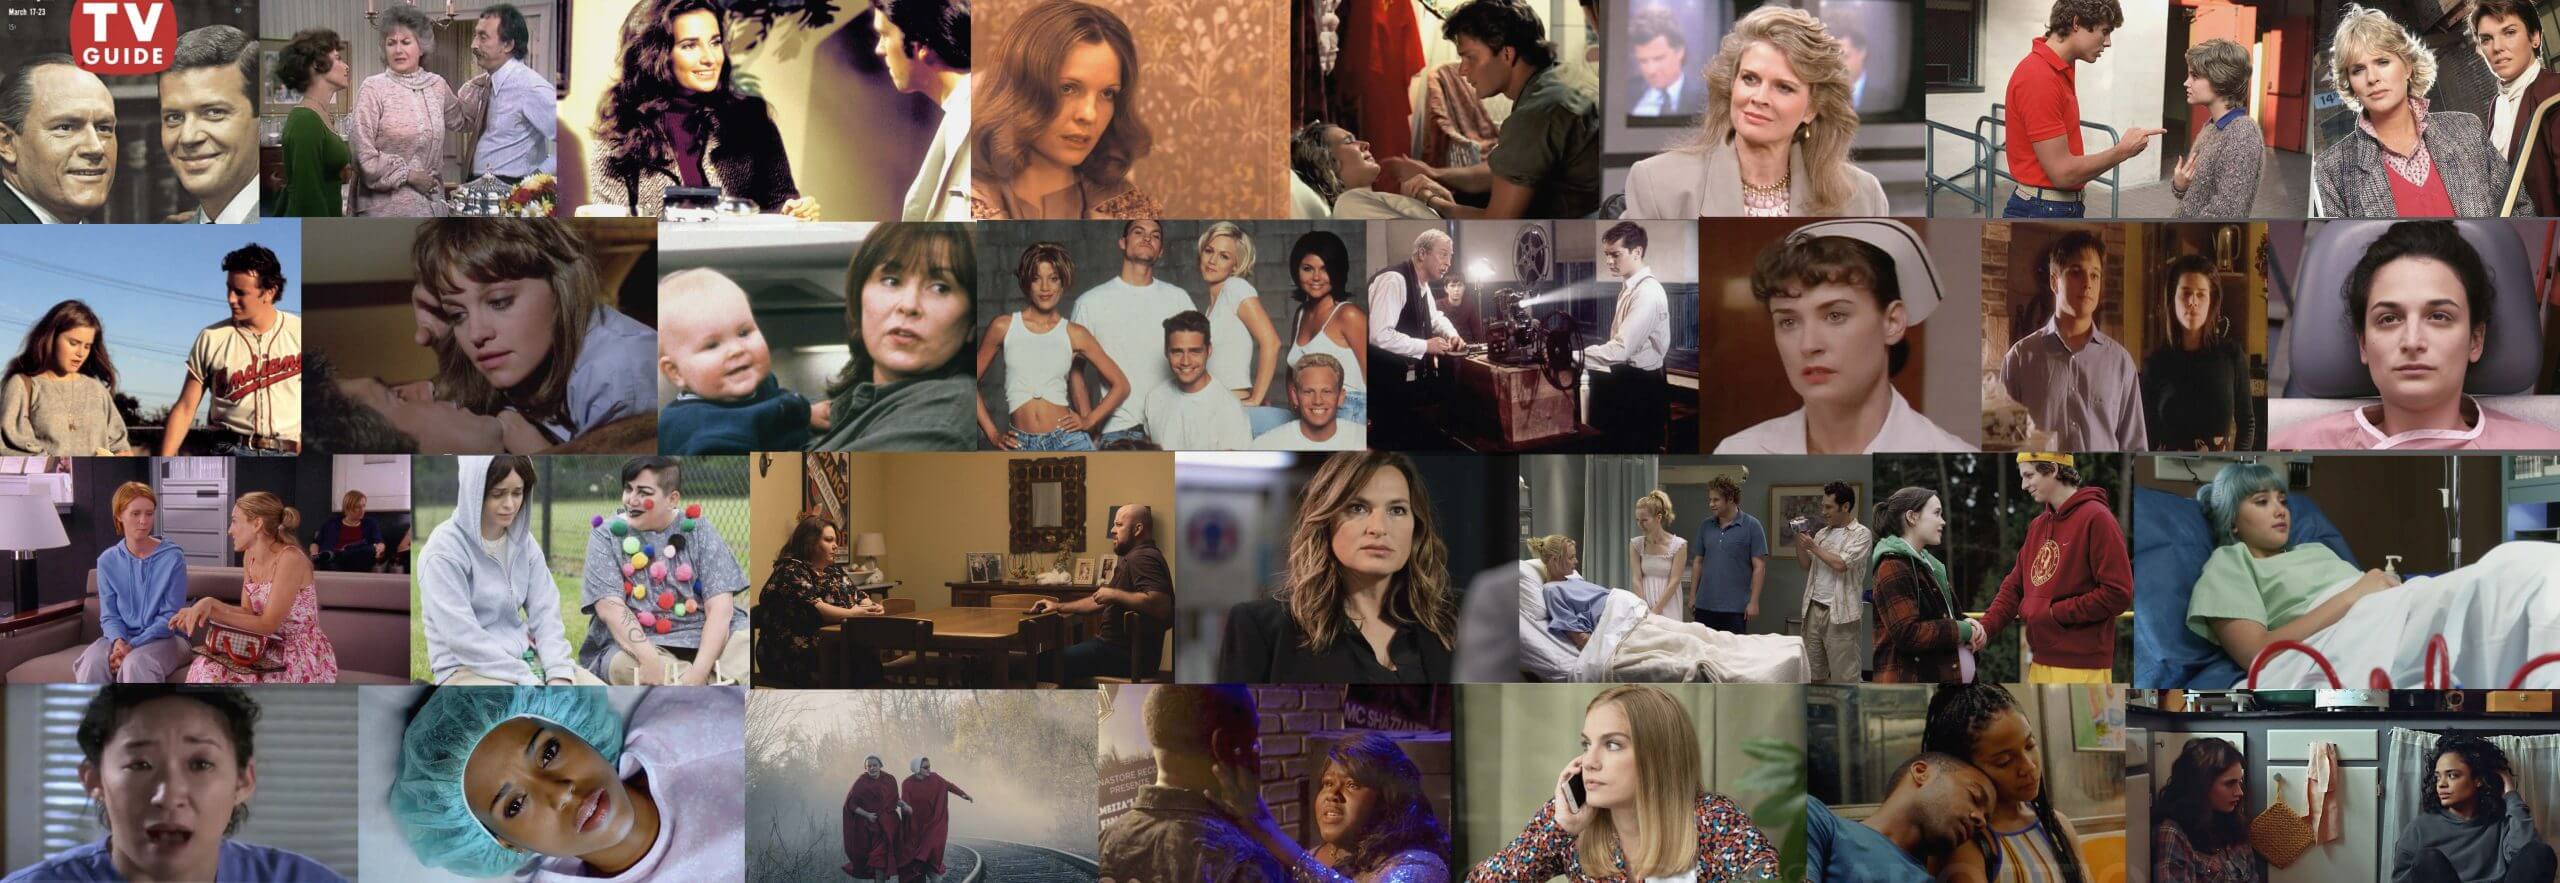 Still from Hollywood Does Abortion. Montage of color images from the films and television shows that will be discussed in the documentary. There are four rows of images, with seven to eight images in each row.